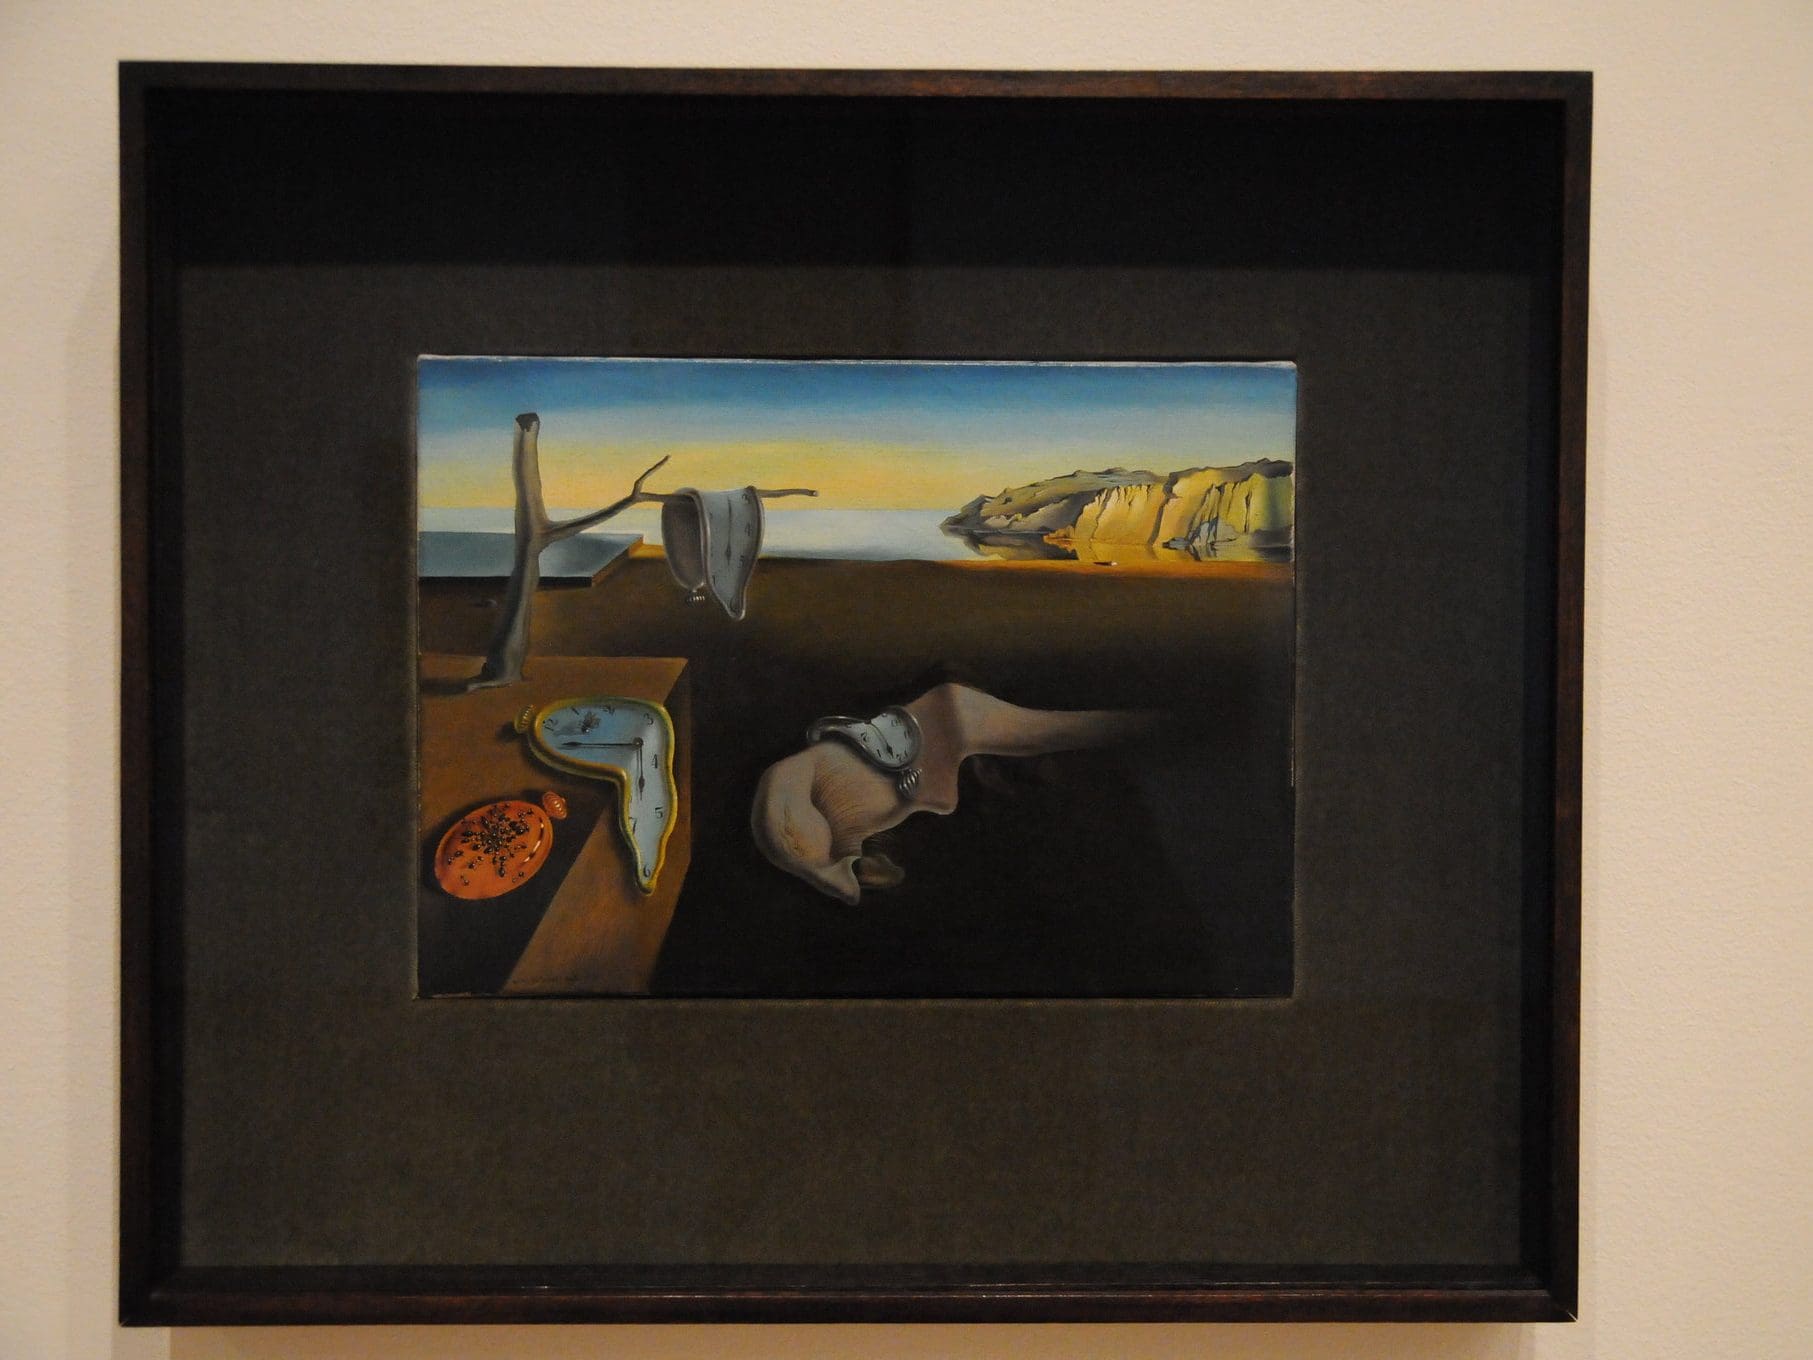 The Persistence of Memory by Salvador Dalí with a frame minimal in style.